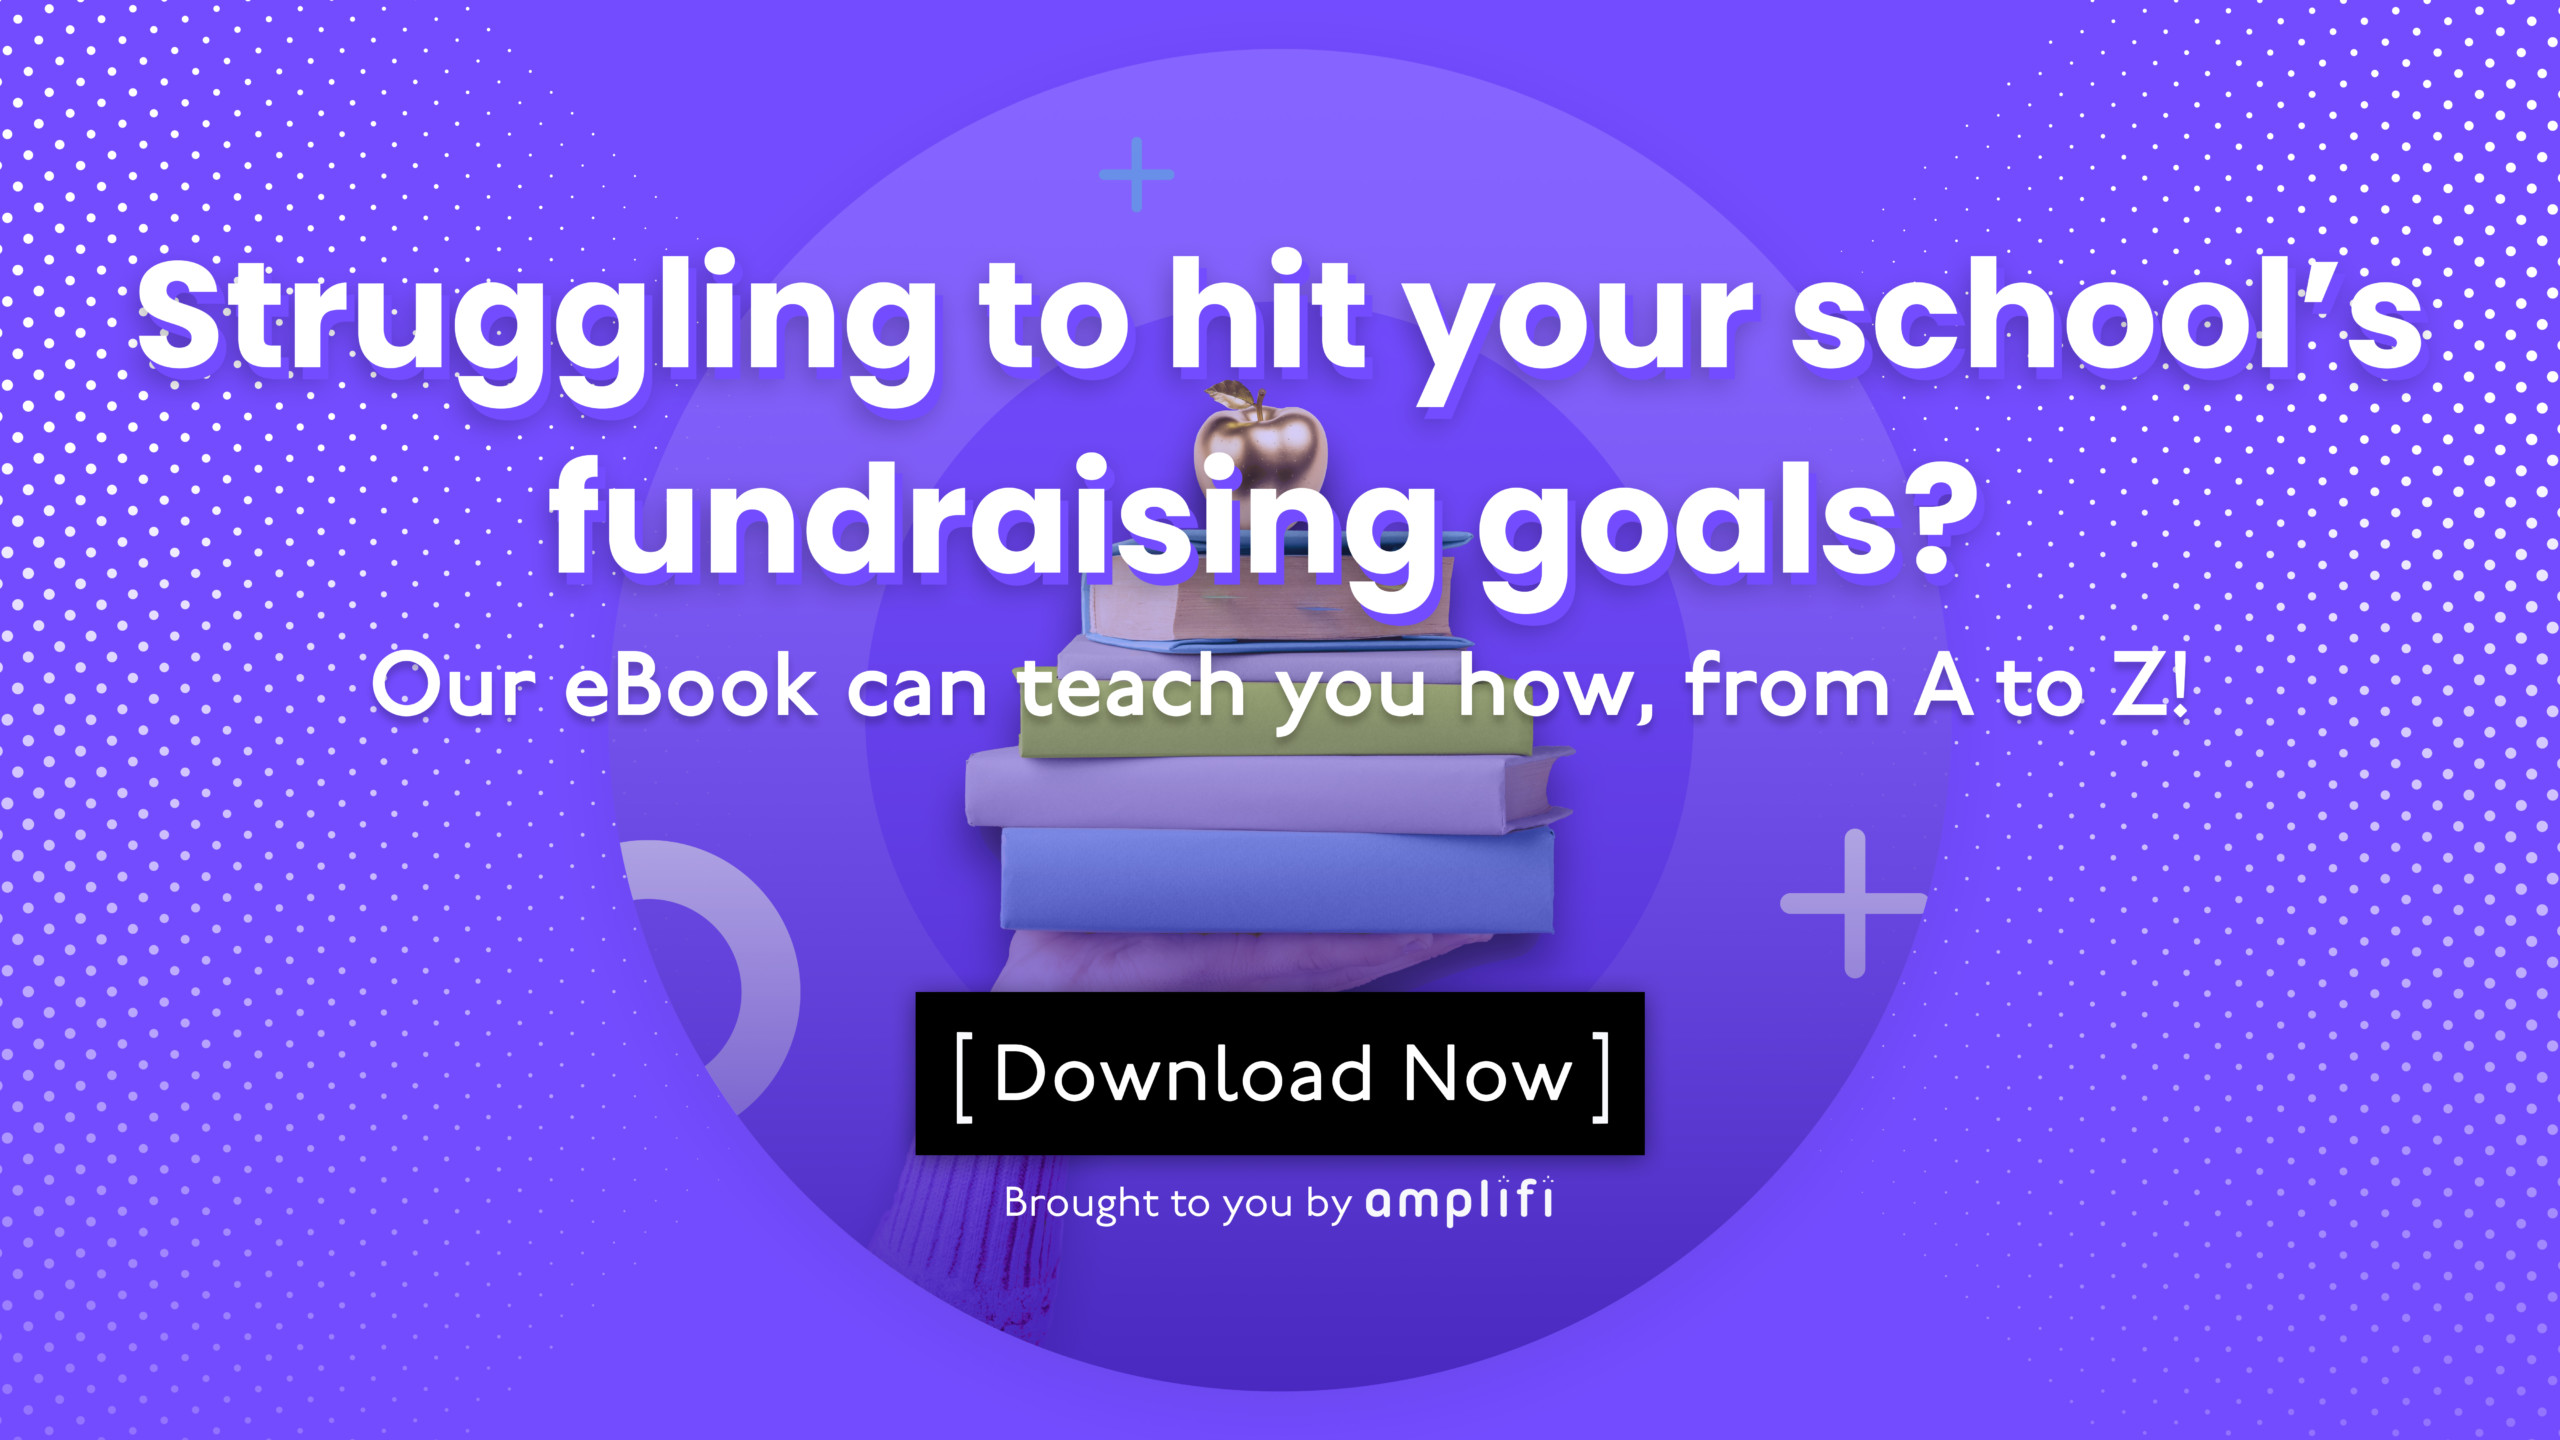 DOWNLOAD NOW: Fundraising for Education.